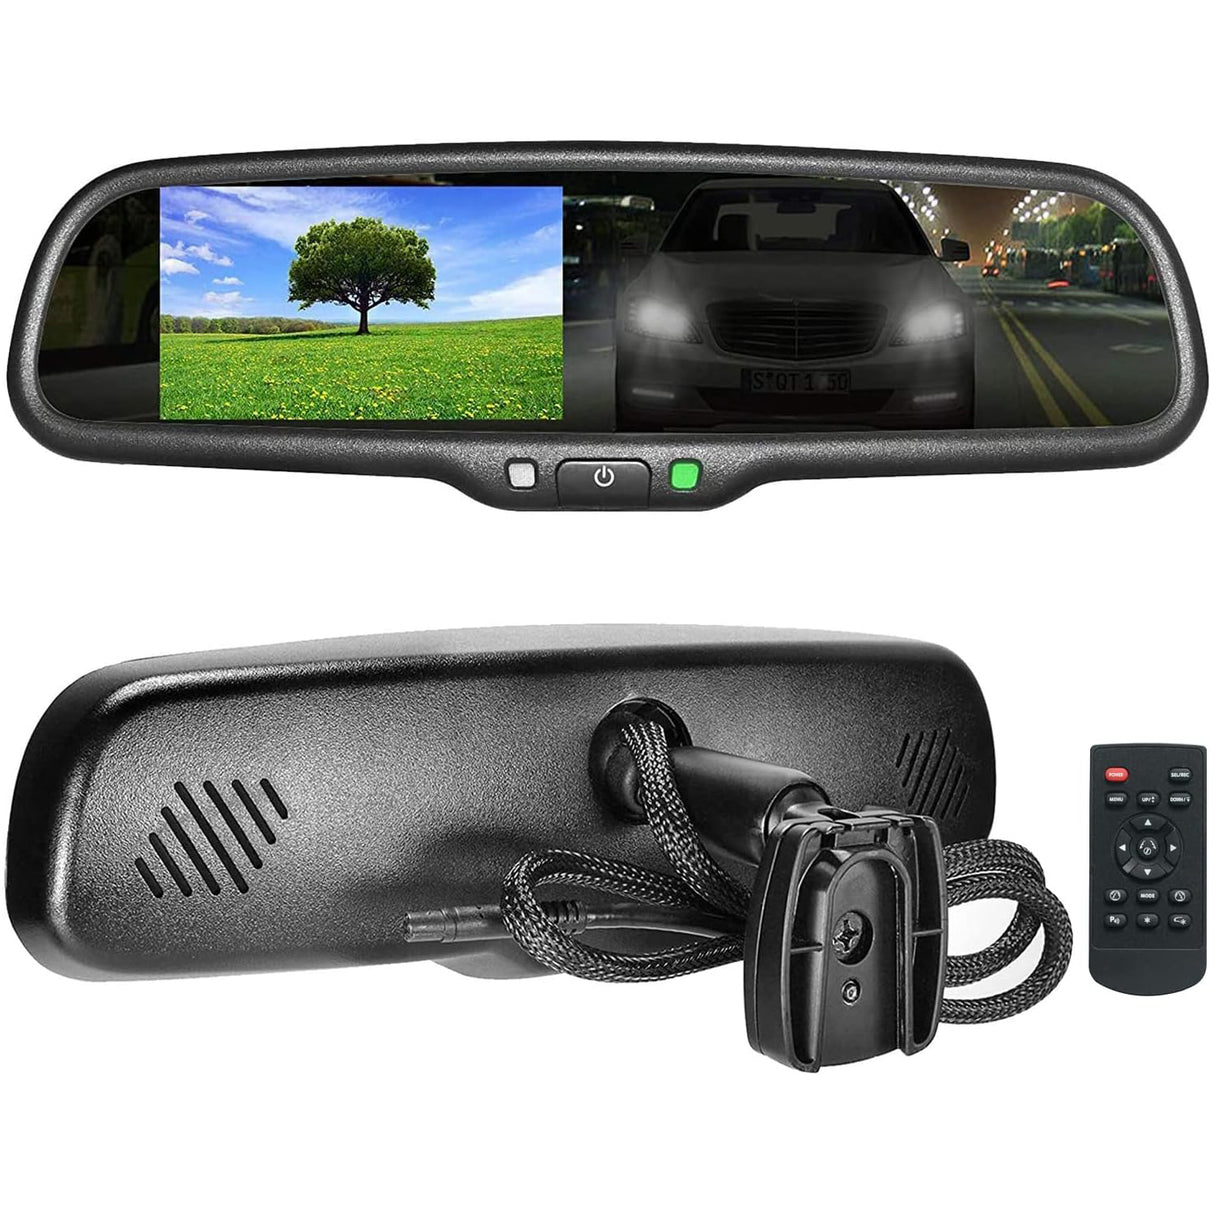 Master Tailgaters 10.5" OEM Rear View Mirror with 4.3" LCD Screen + Auto Dimming Mirror | Ultra Bright | Rearview Universal Fit | Auto Adjusting Brightness LCD | Anti Glare | Full Mirror Replacement